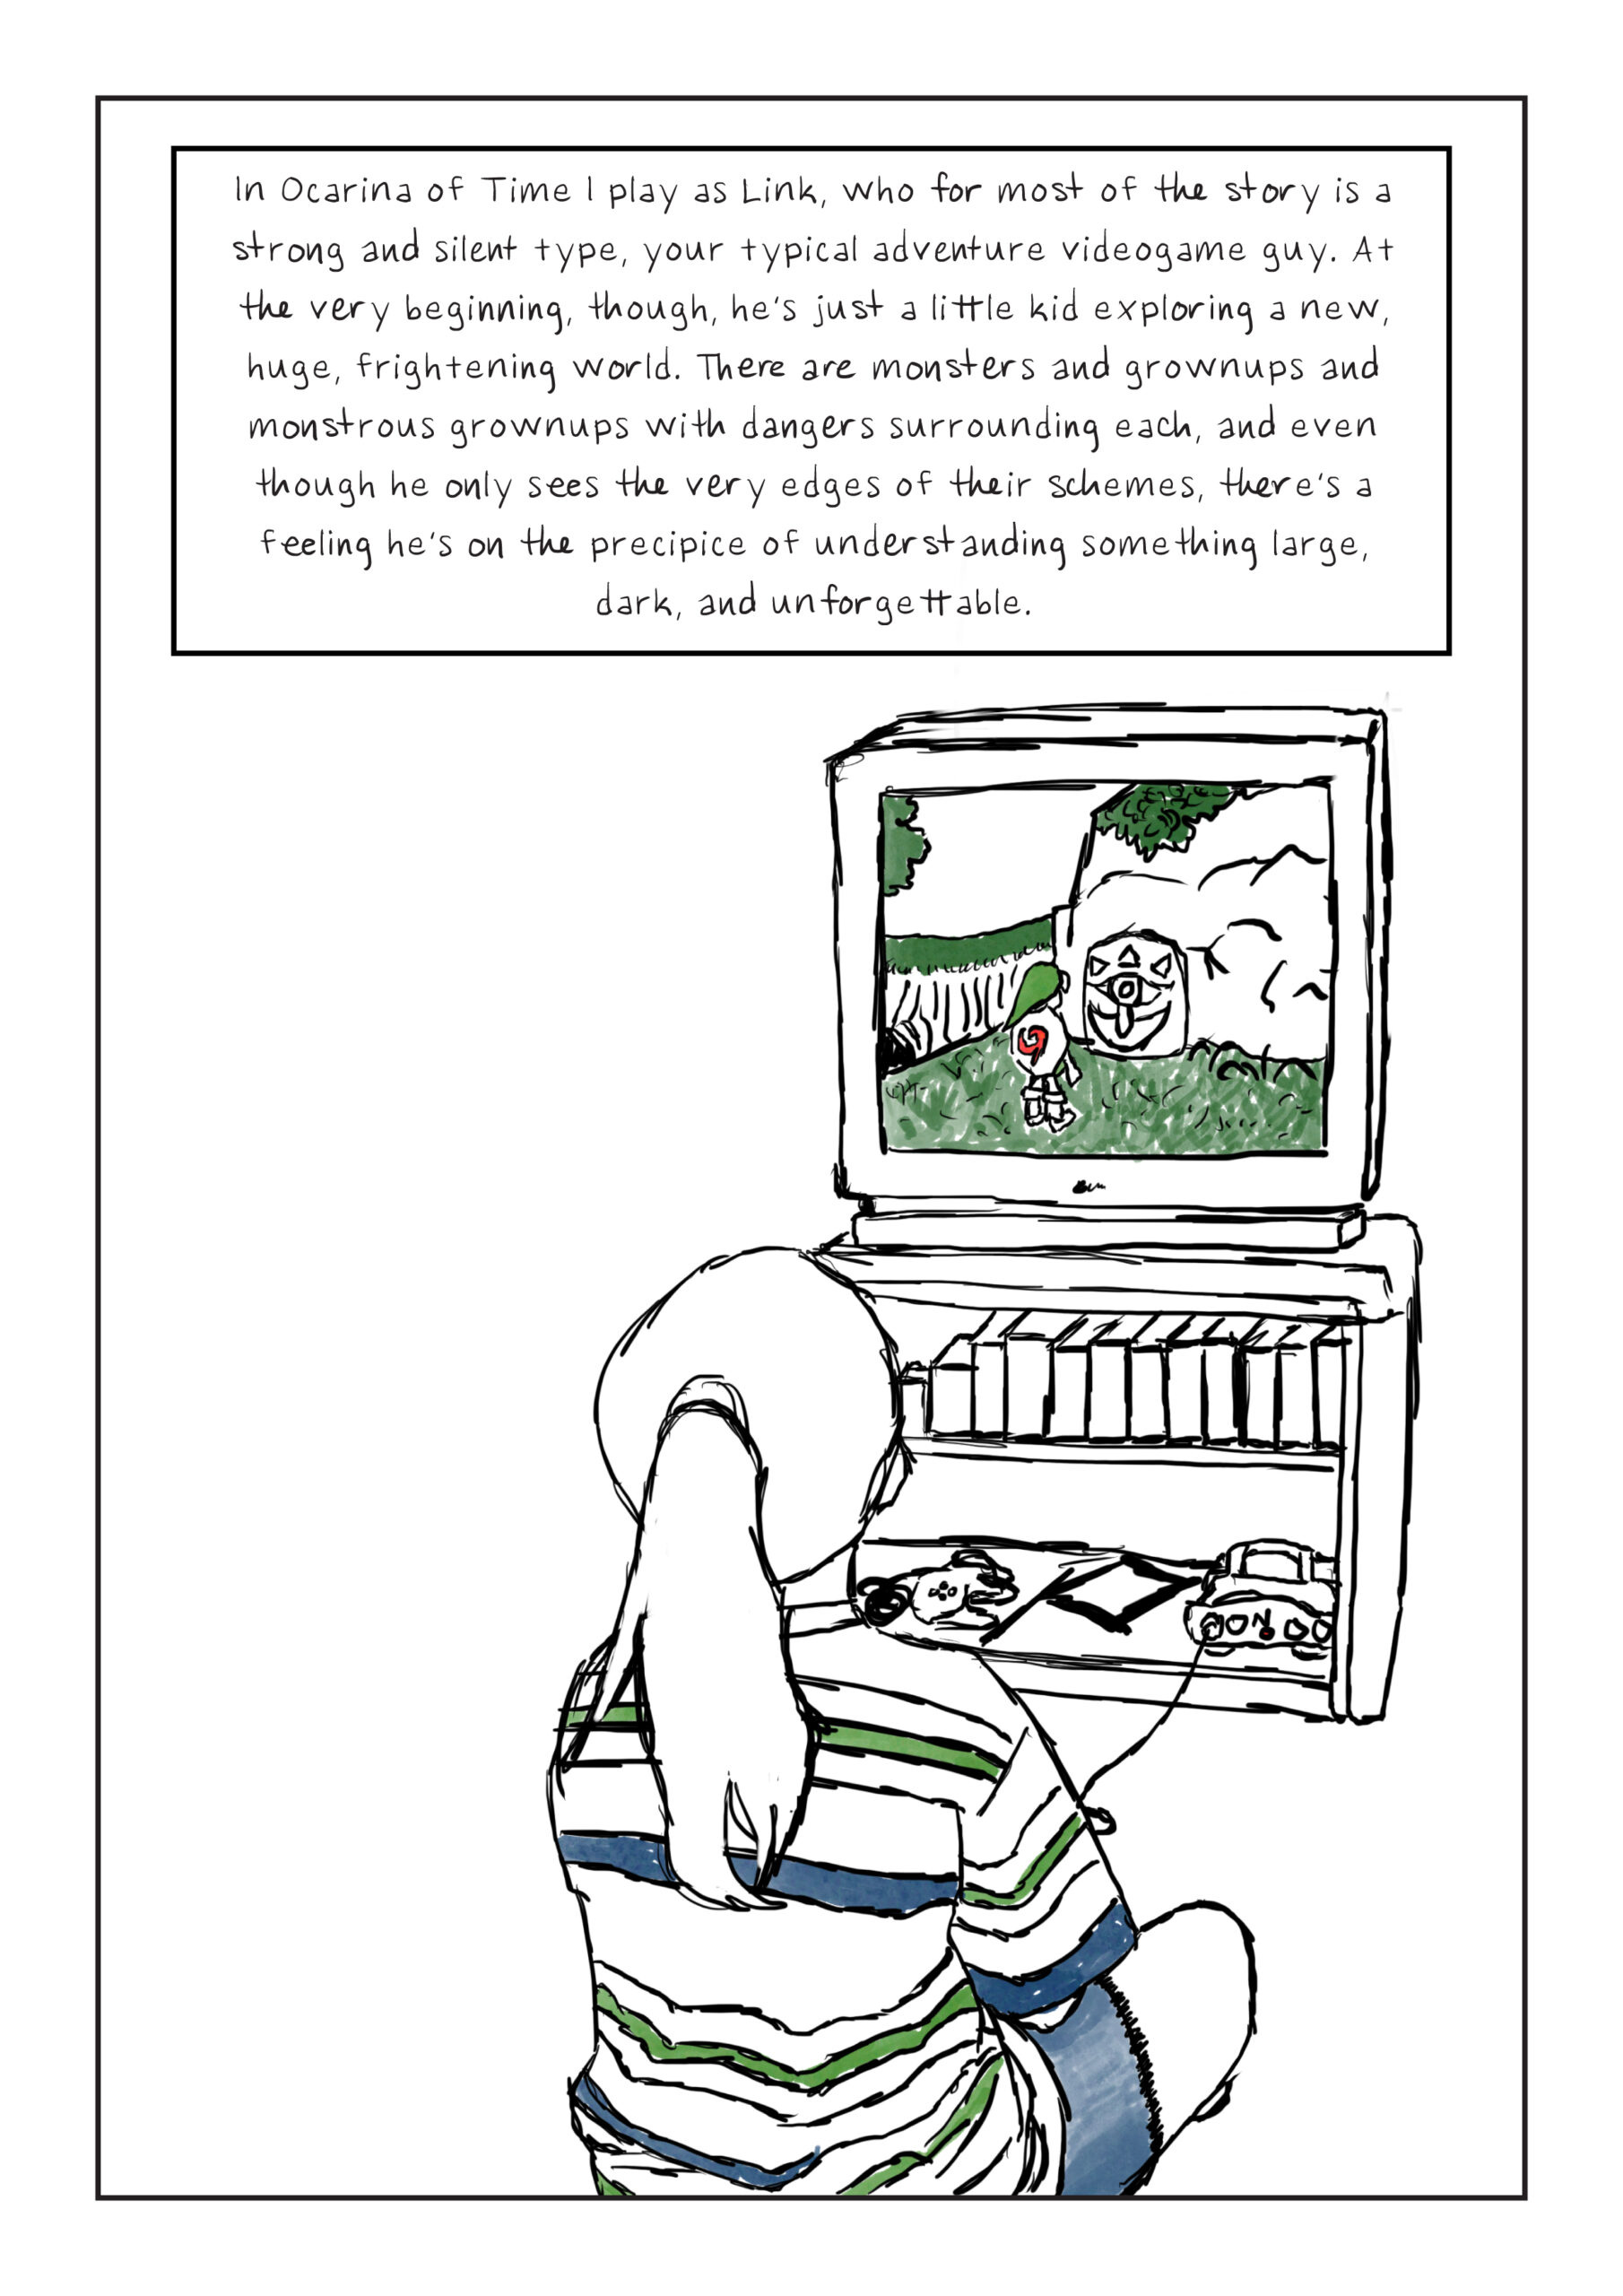 A line drawing of a girl in a striped t-shirt and jean shorts tethered to a TV by a Nintedo 64 console. She is playing Ocarina of Time. Text: In Ocarina of Time I play as Link, who for most of the story is a strong and silent type, your typical adventure videogame guy. At the very beginning, though, he’s just a little kid exploring a new, huge, frightening world. There are monsters and grownups and monstrous grownups with dangers surrounding each, and even though he only sees the very edges of their schemes, there’s a feeling he’s on the precipice of understanding something large, dark, and unforgettable.